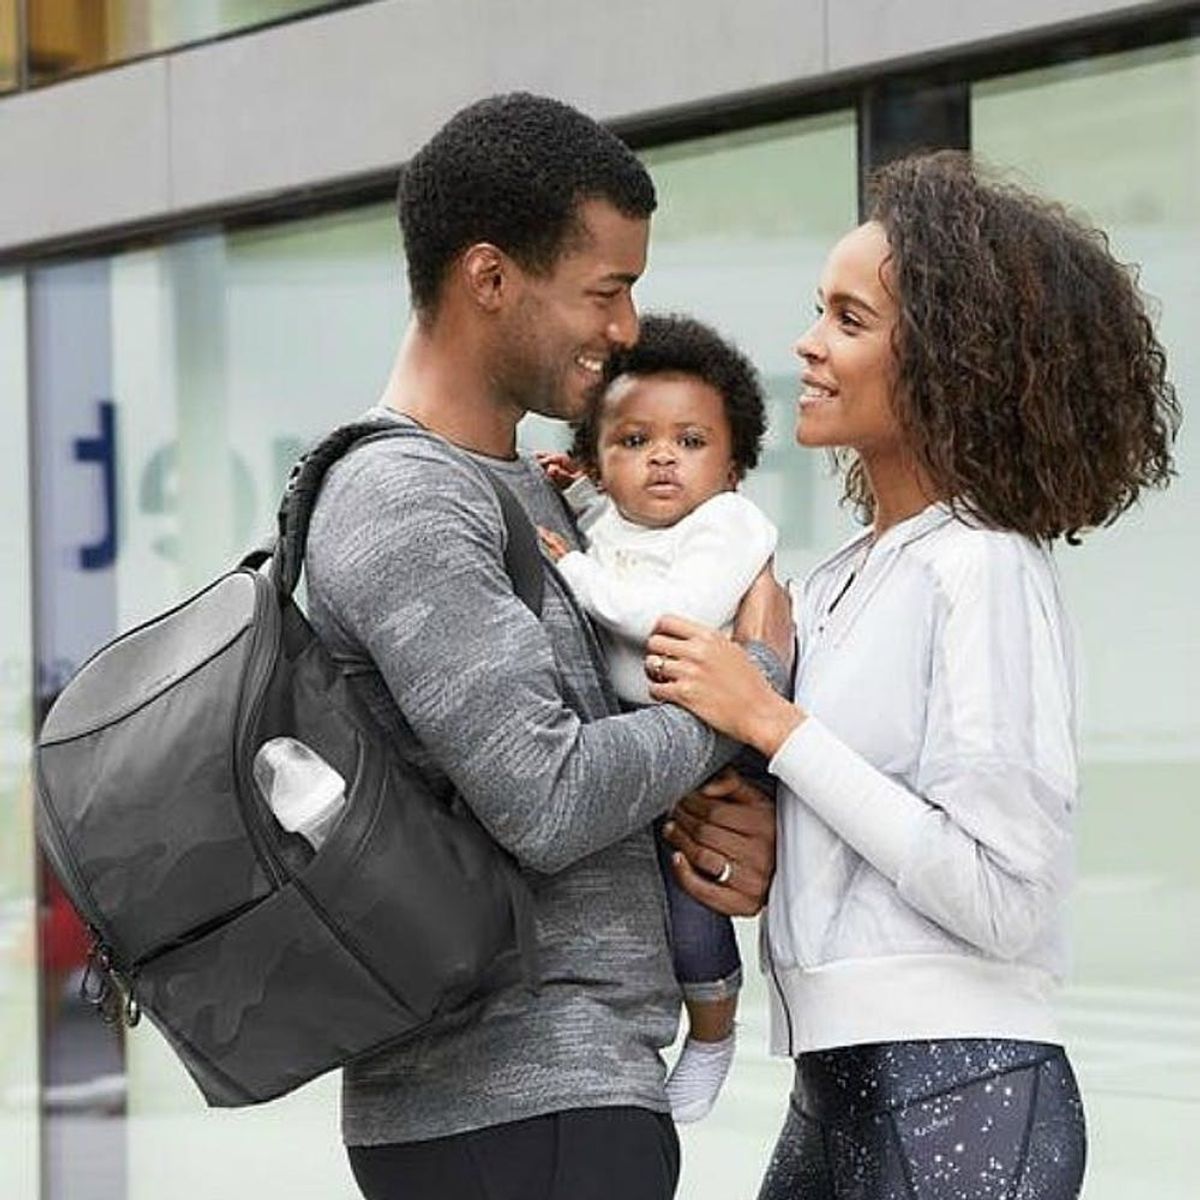 9 Essential Gear to Make Traveling With a Baby a Breeze